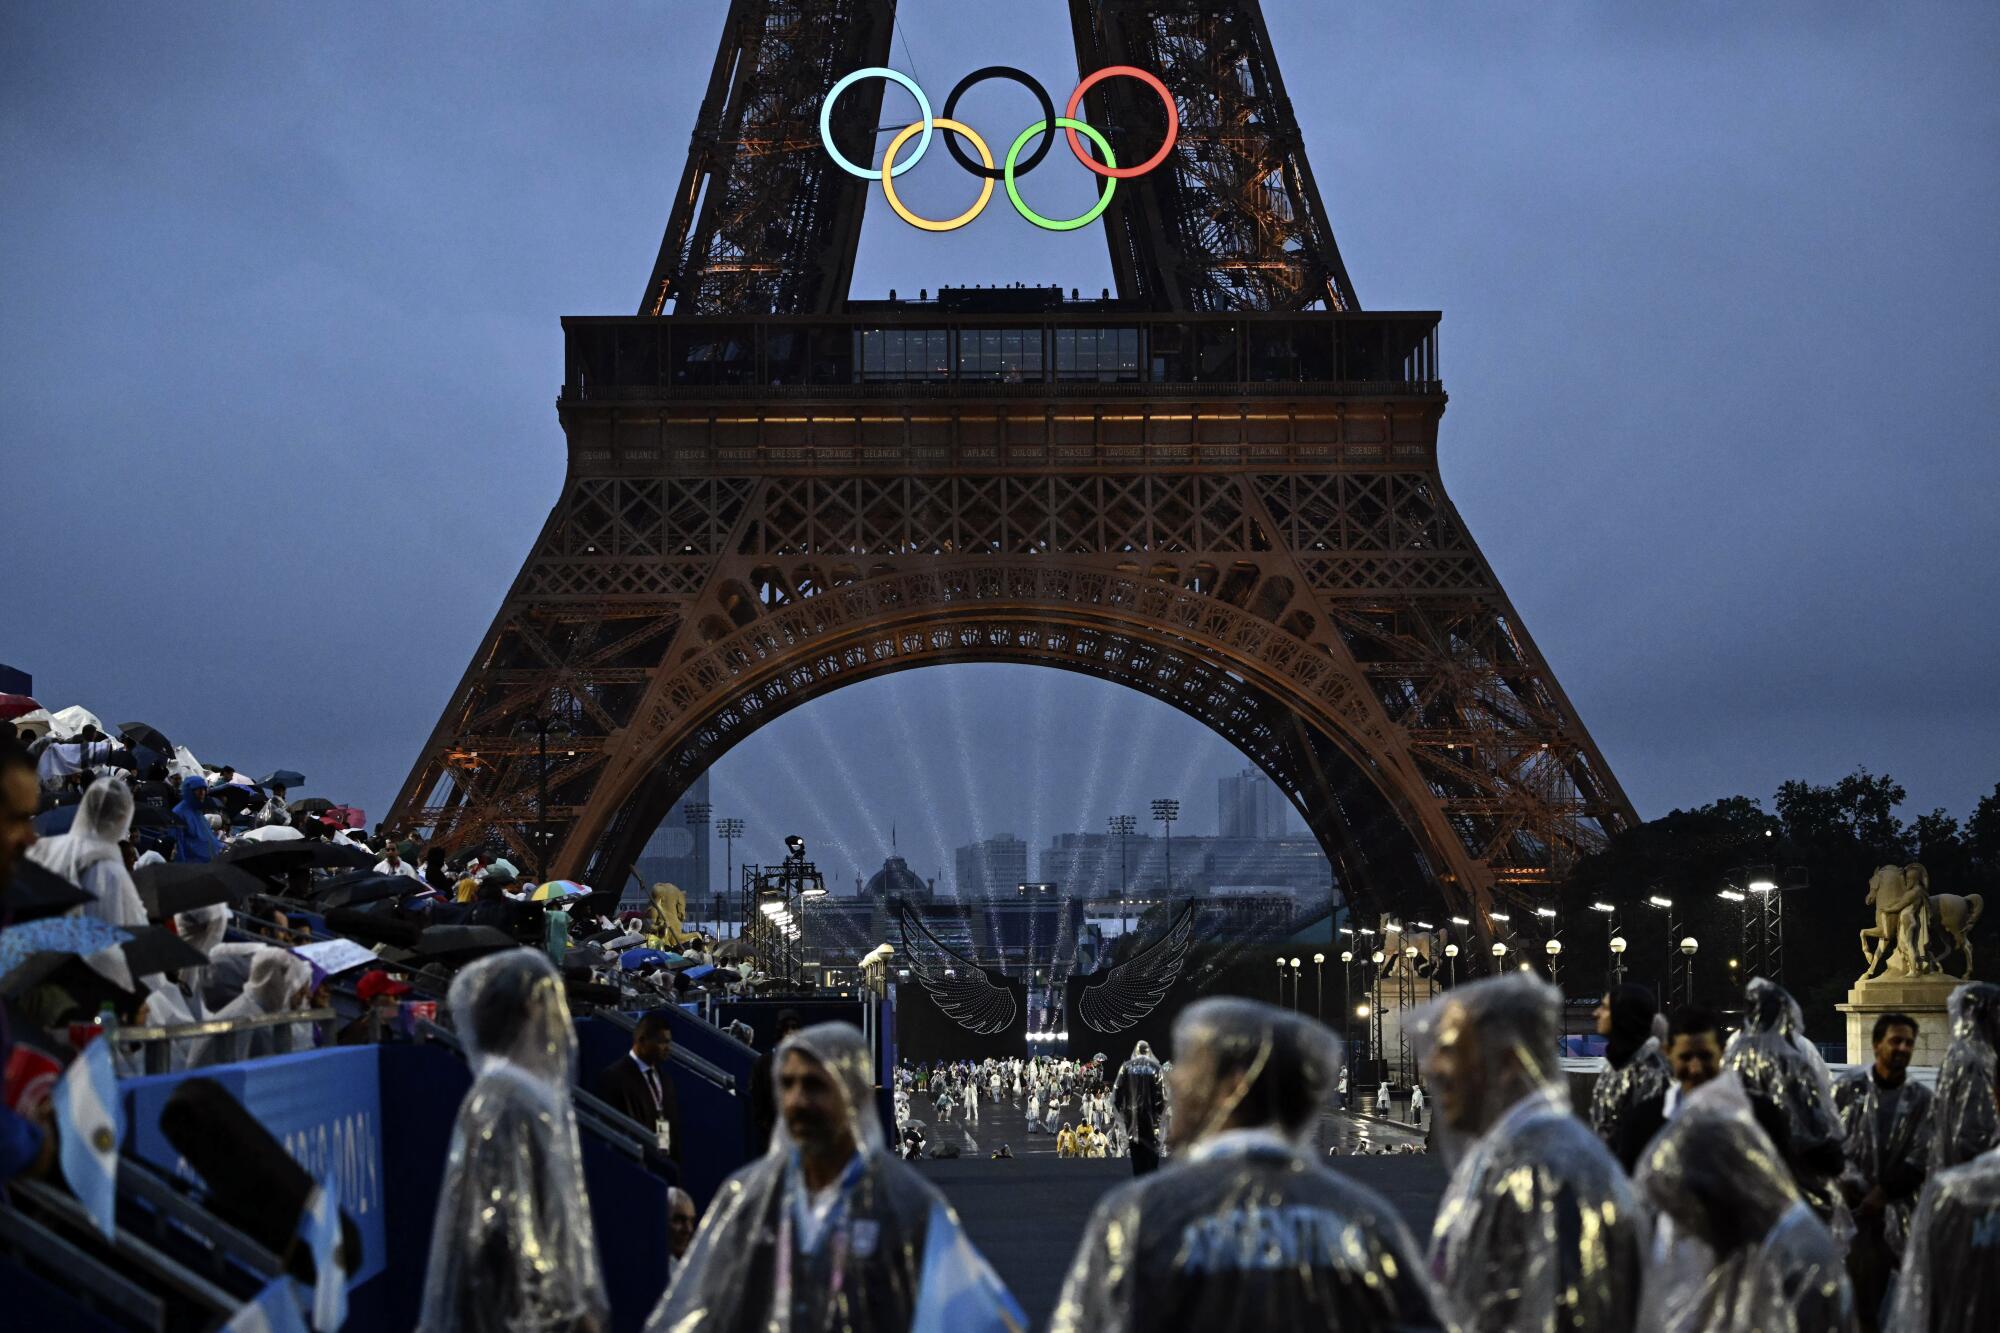 The Eiffel Tower and Olympic Rings are illuminated at the Trocadero during the opening ceremony.